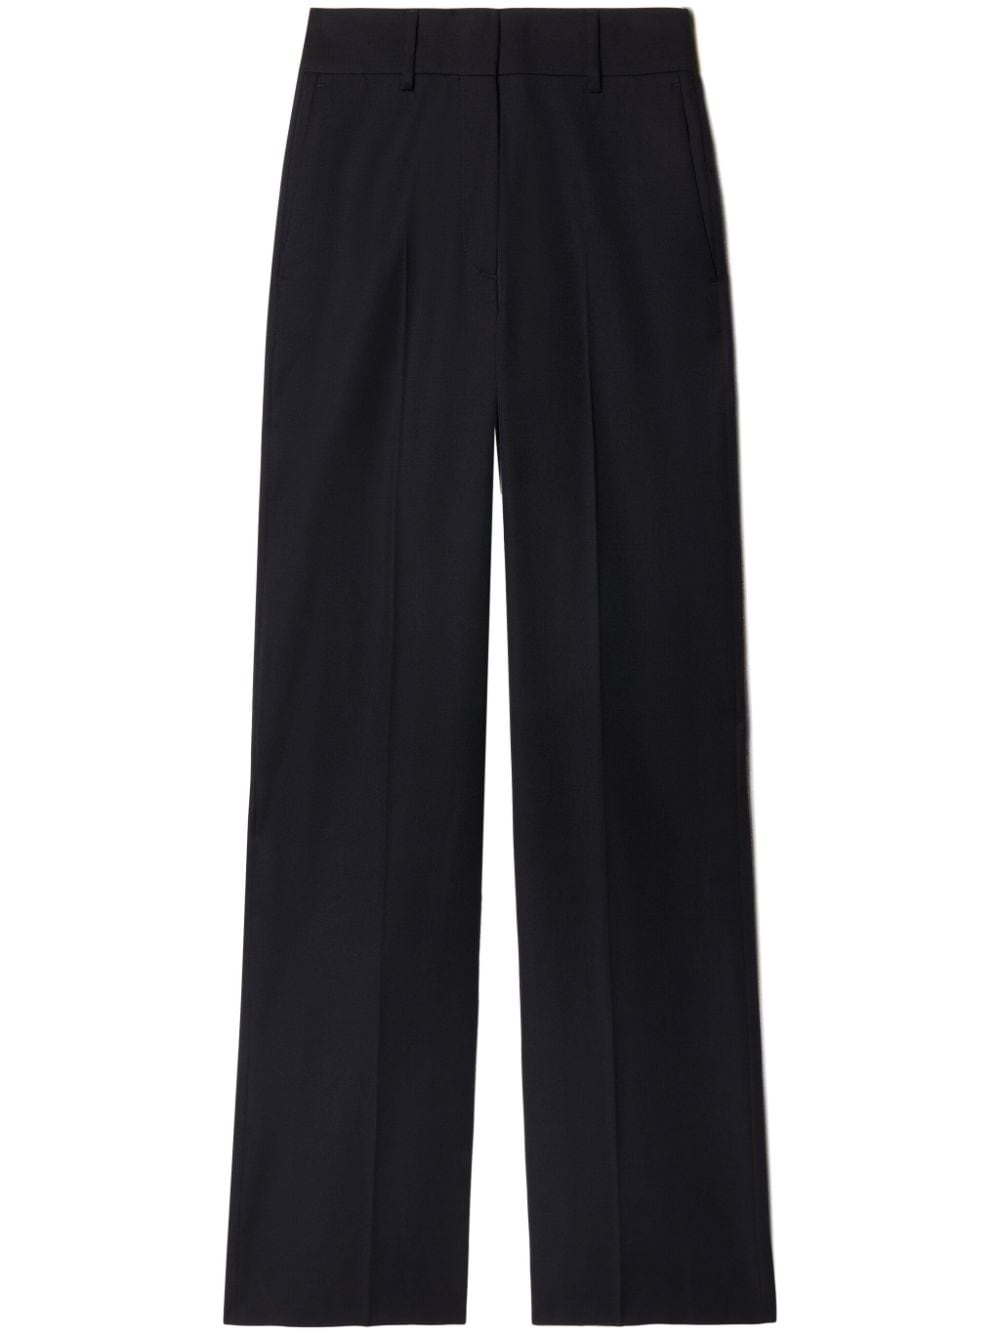 Off White Trousers Black